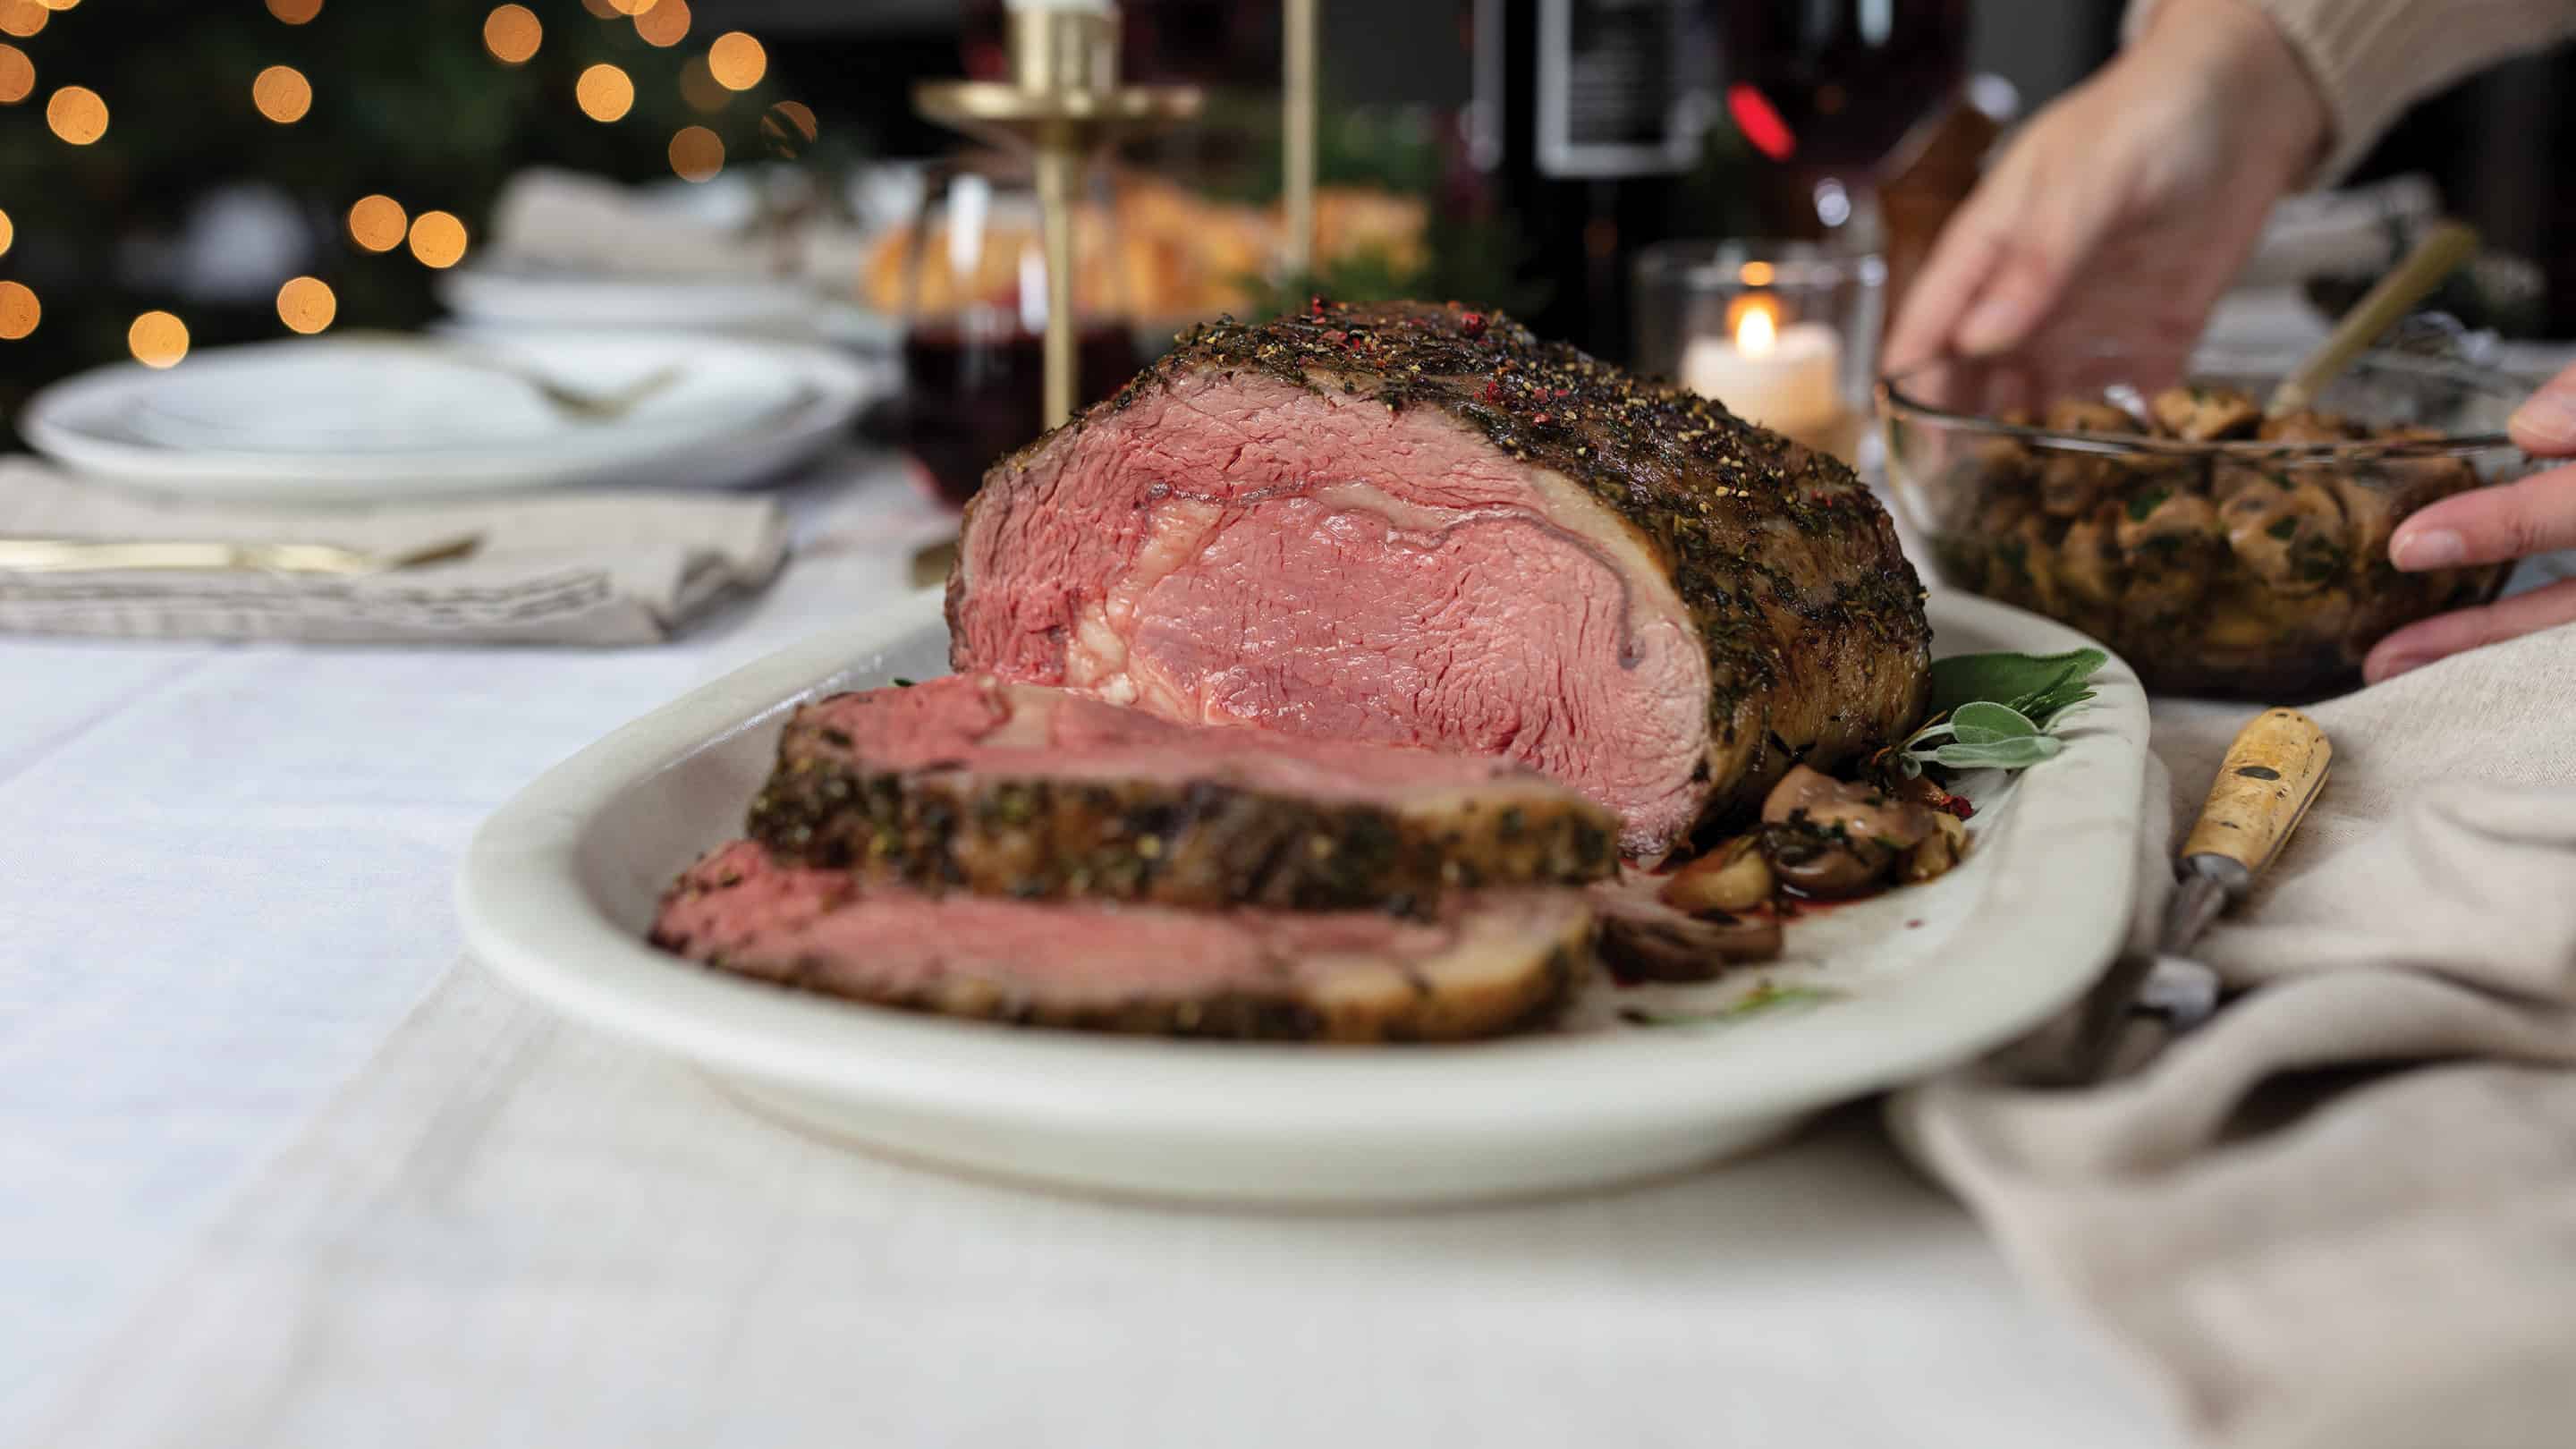 Garlic & Herb Prime Rib Recipe: How to Cook Prime Rib for Christmas, Beef